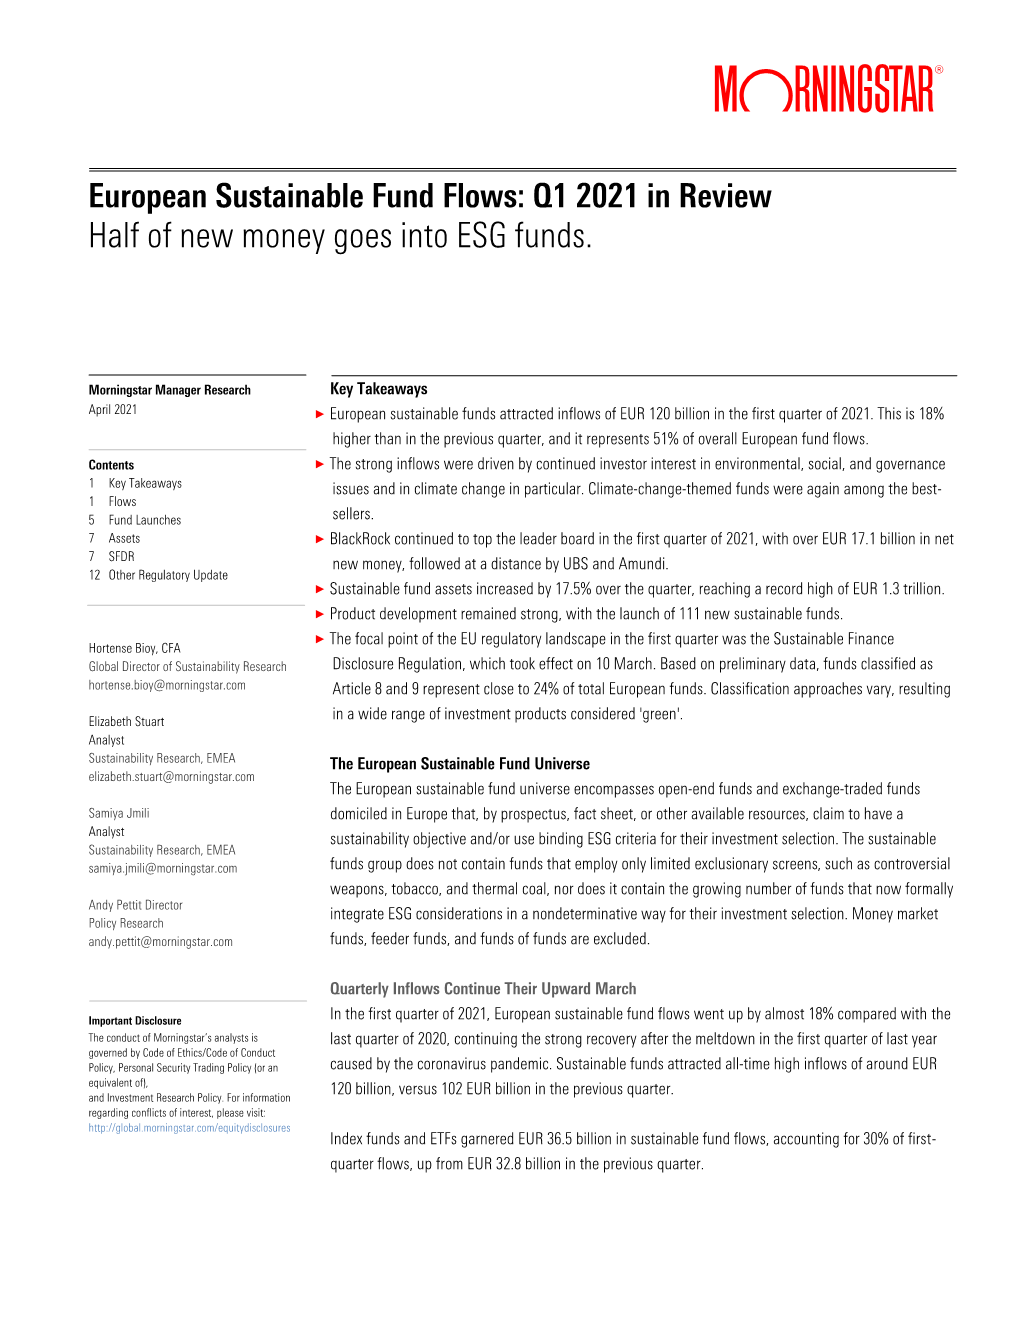 Q1 2021 in Review Half of New Money Goes Into ESG Funds